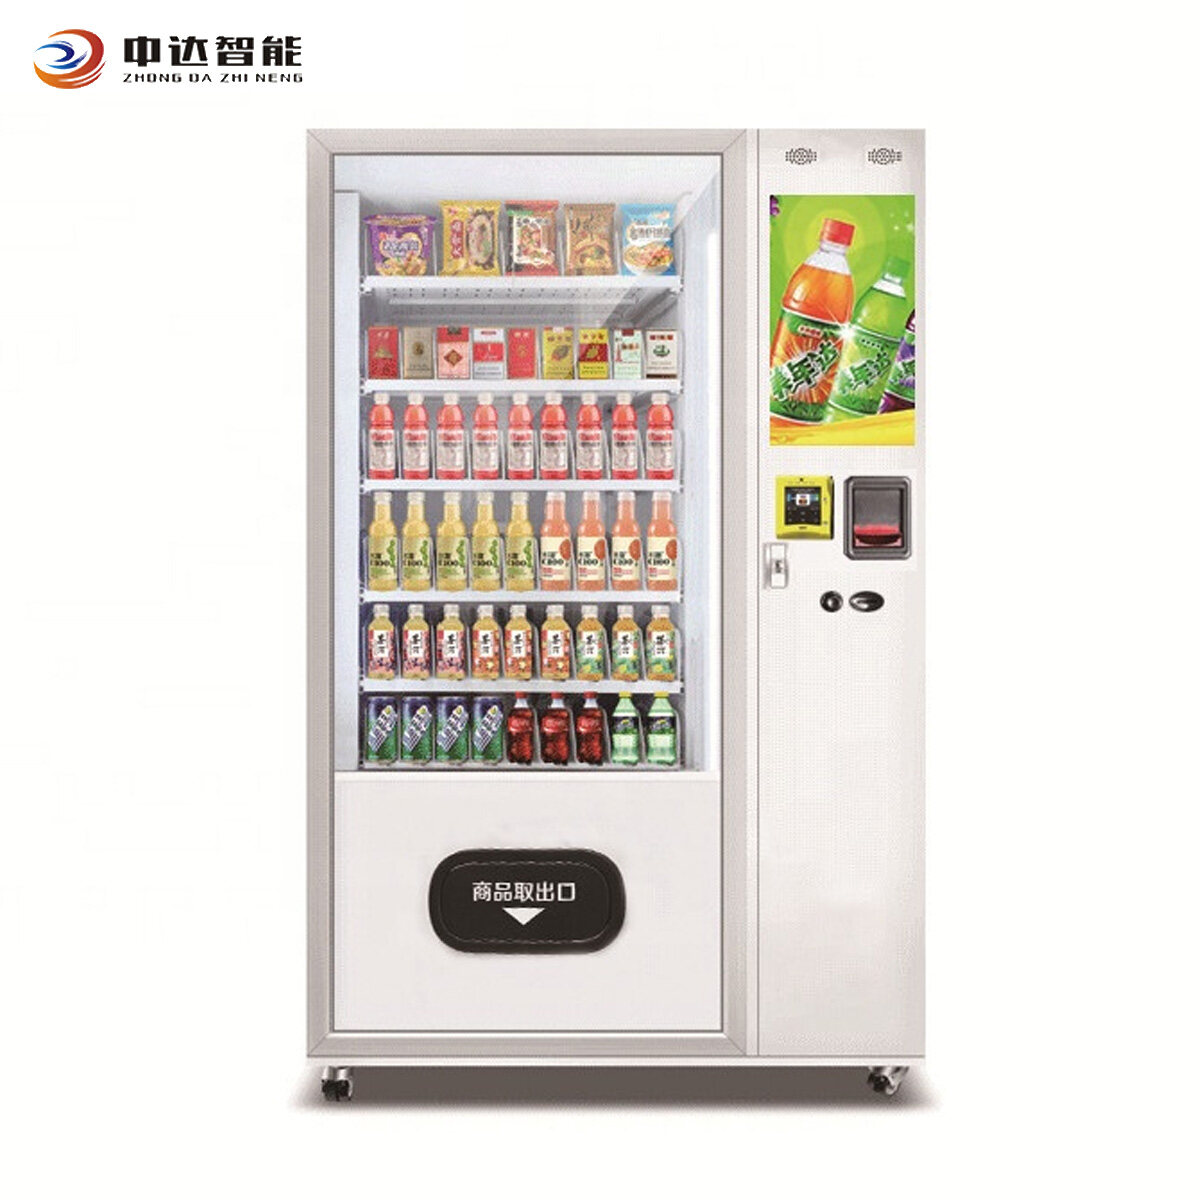 snack drink vending machine combo For Sale,snack and drink combo vending machine Manufacturer,Wholesale frozen drink vending machine,Custom bottle drink vending machine